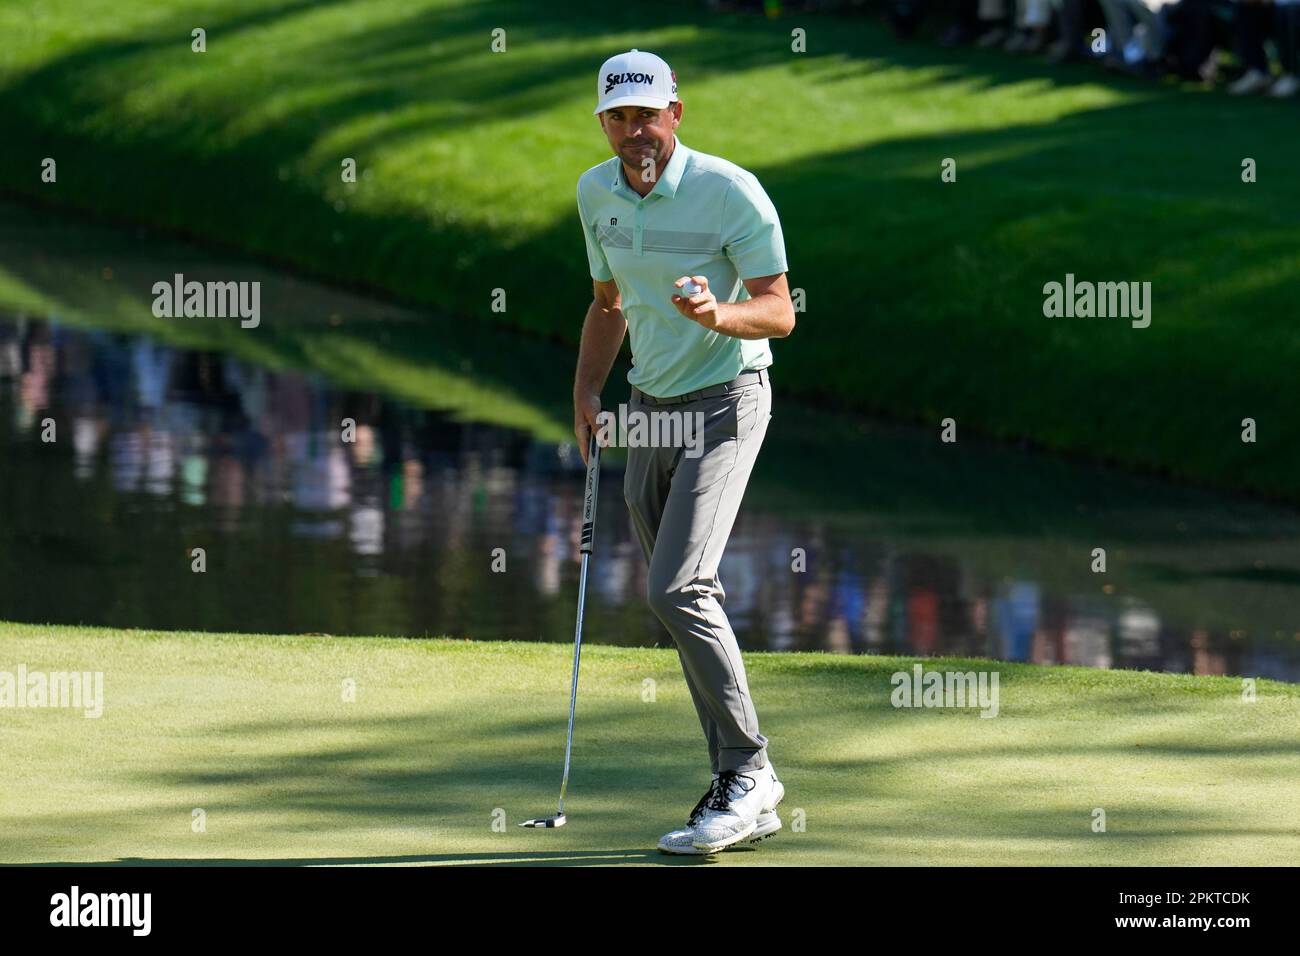 Keegan Bradley waves after his putt on the 16th hole during the final